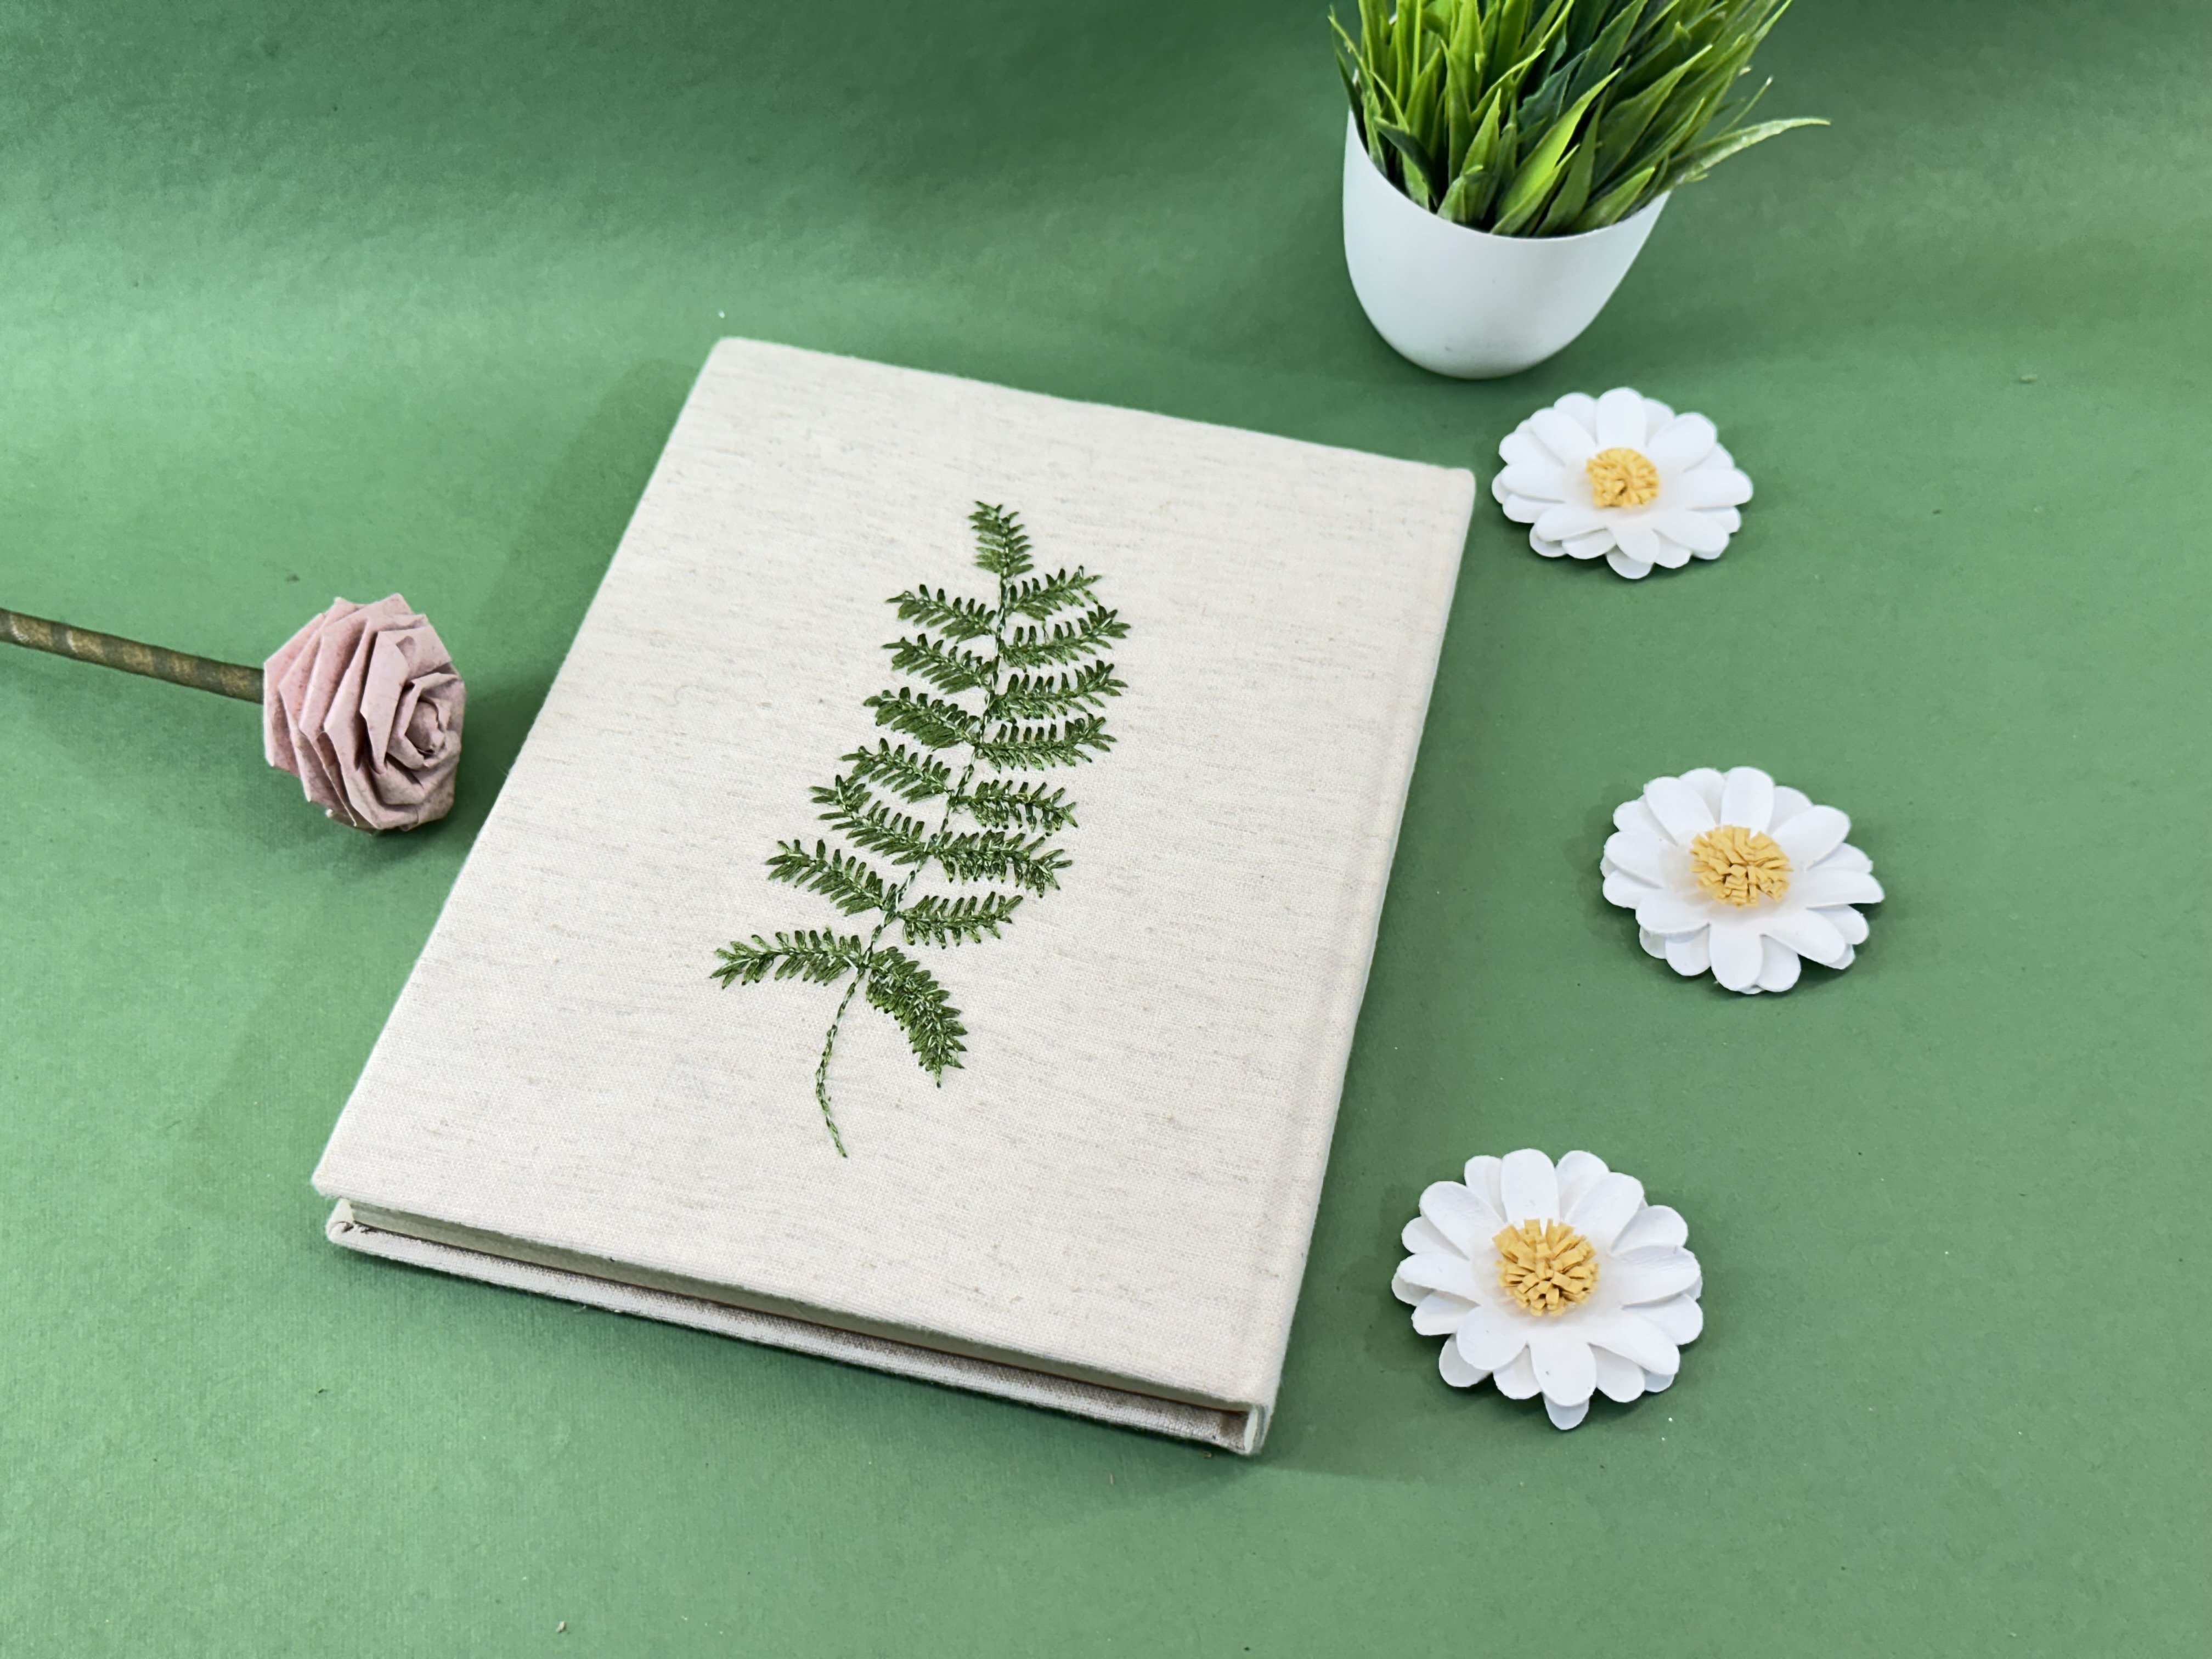 Handmade Embroidery Handmade Paper Journal in canvas Fabric Cover 